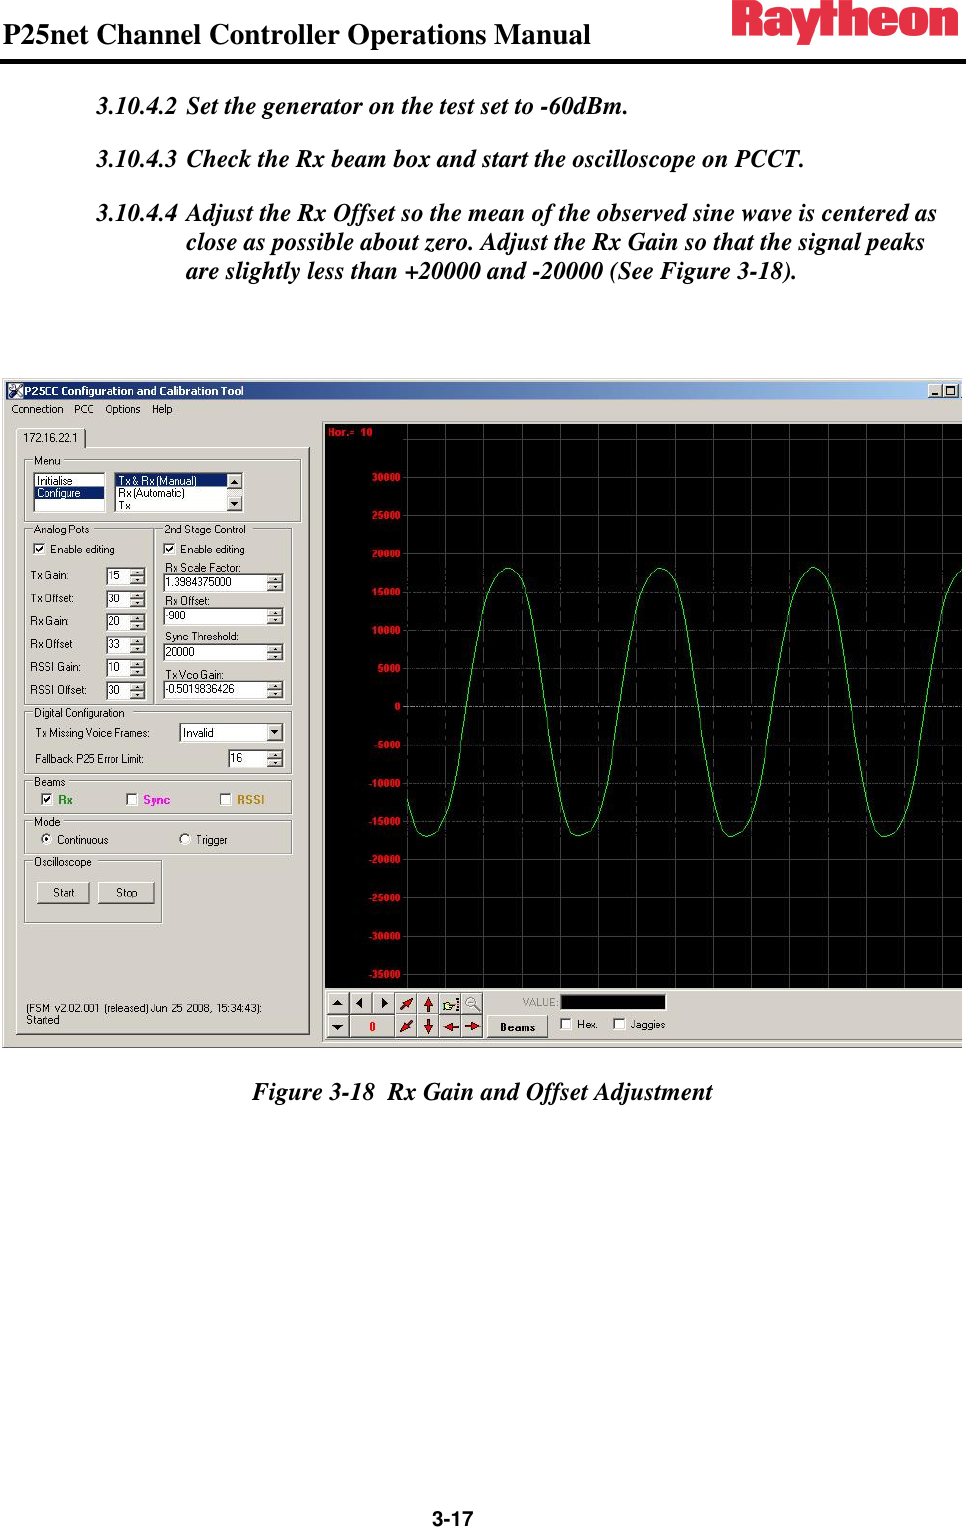 P25net Channel Controller Operations Manual                 3-17 3.10.4.2 Set the generator on the test set to -60dBm. 3.10.4.3 Check the Rx beam box and start the oscilloscope on PCCT.  3.10.4.4 Adjust the Rx Offset so the mean of the observed sine wave is centered as close as possible about zero. Adjust the Rx Gain so that the signal peaks are slightly less than +20000 and -20000 (See Figure 3-18).     Figure 3-18  Rx Gain and Offset Adjustment  